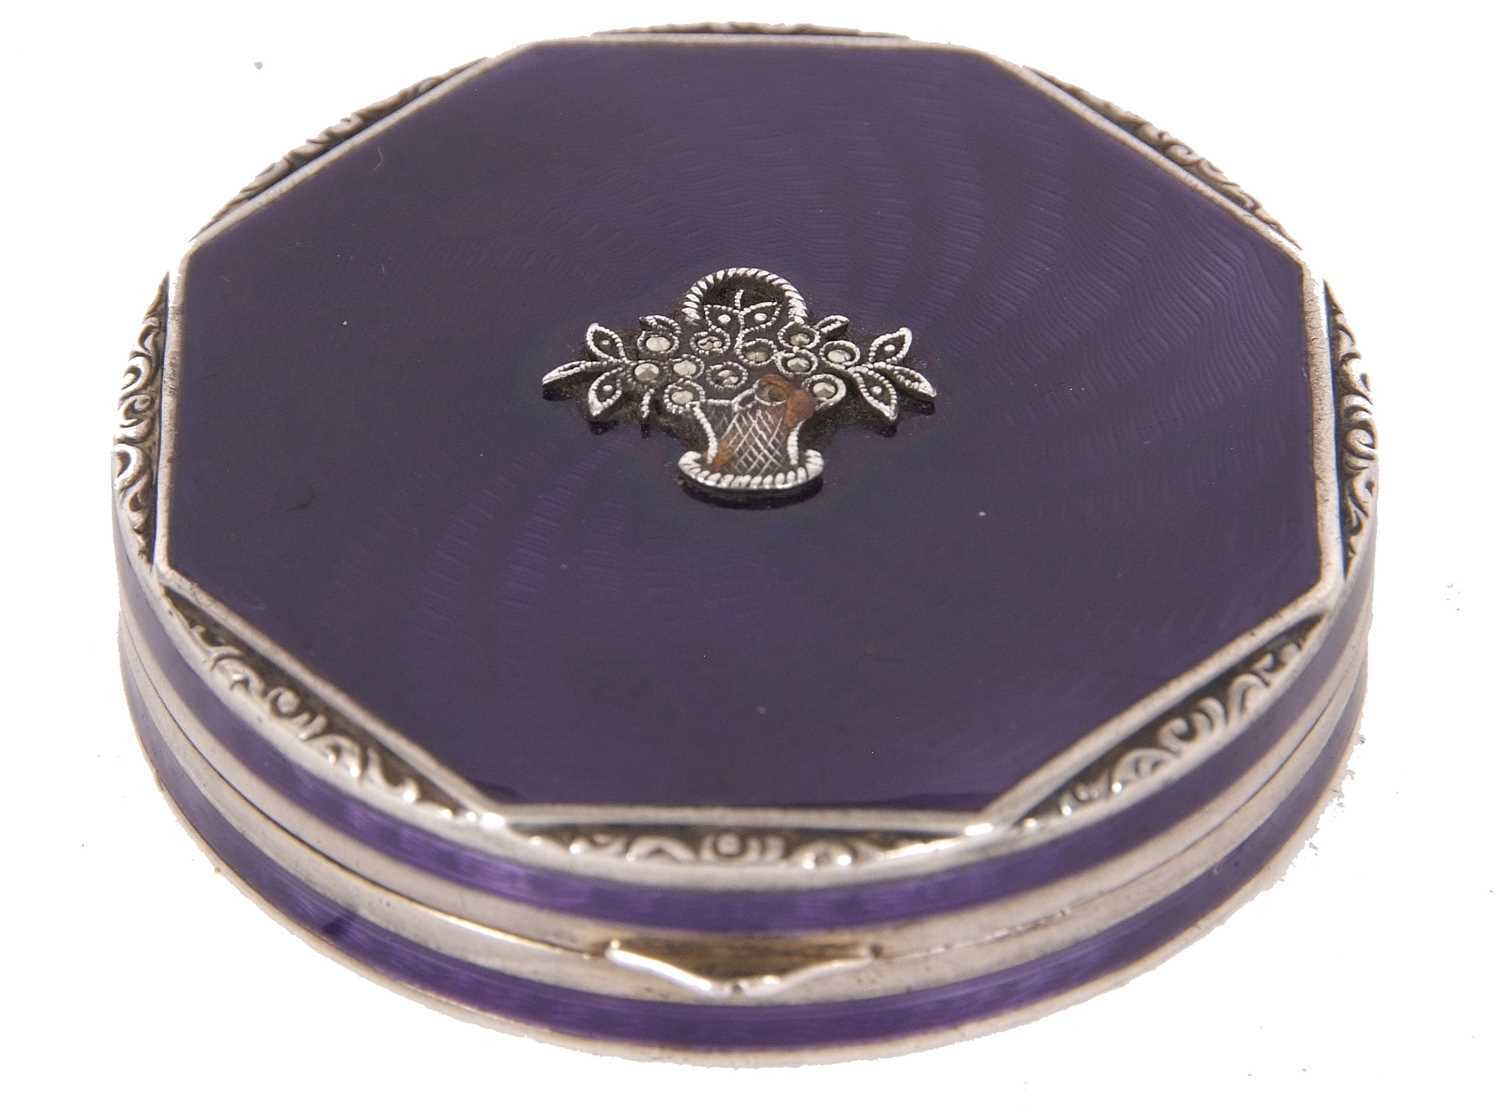 A white metal and enamel compact of octagonal form, the lid decorated with a purple guilloche enamel